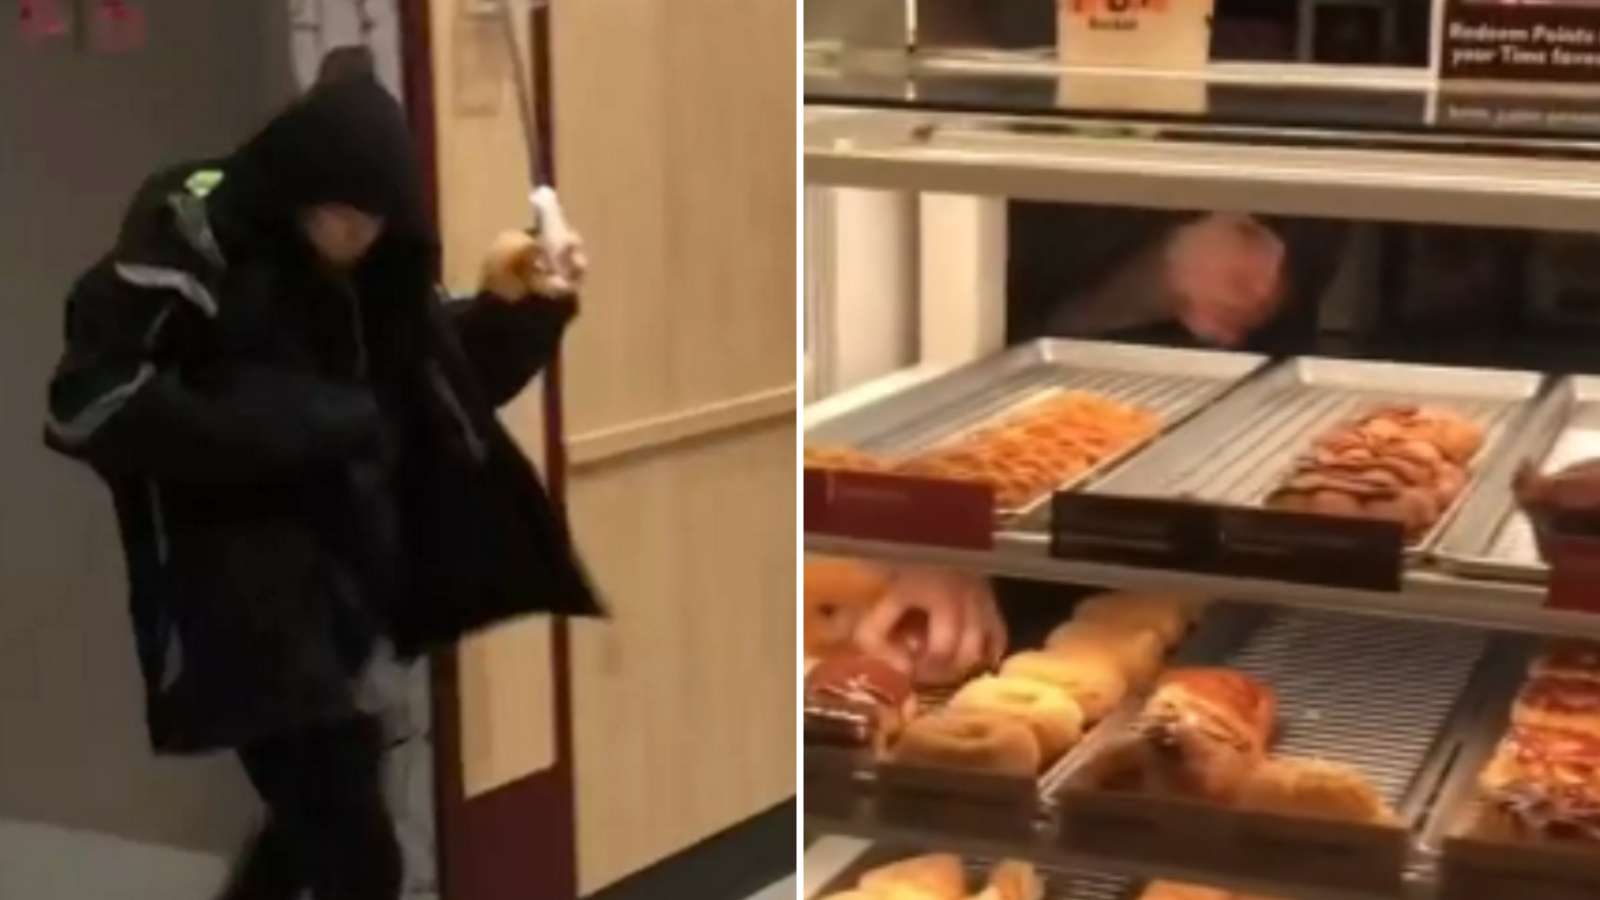 man robs tim hortons with knife and steals donuts